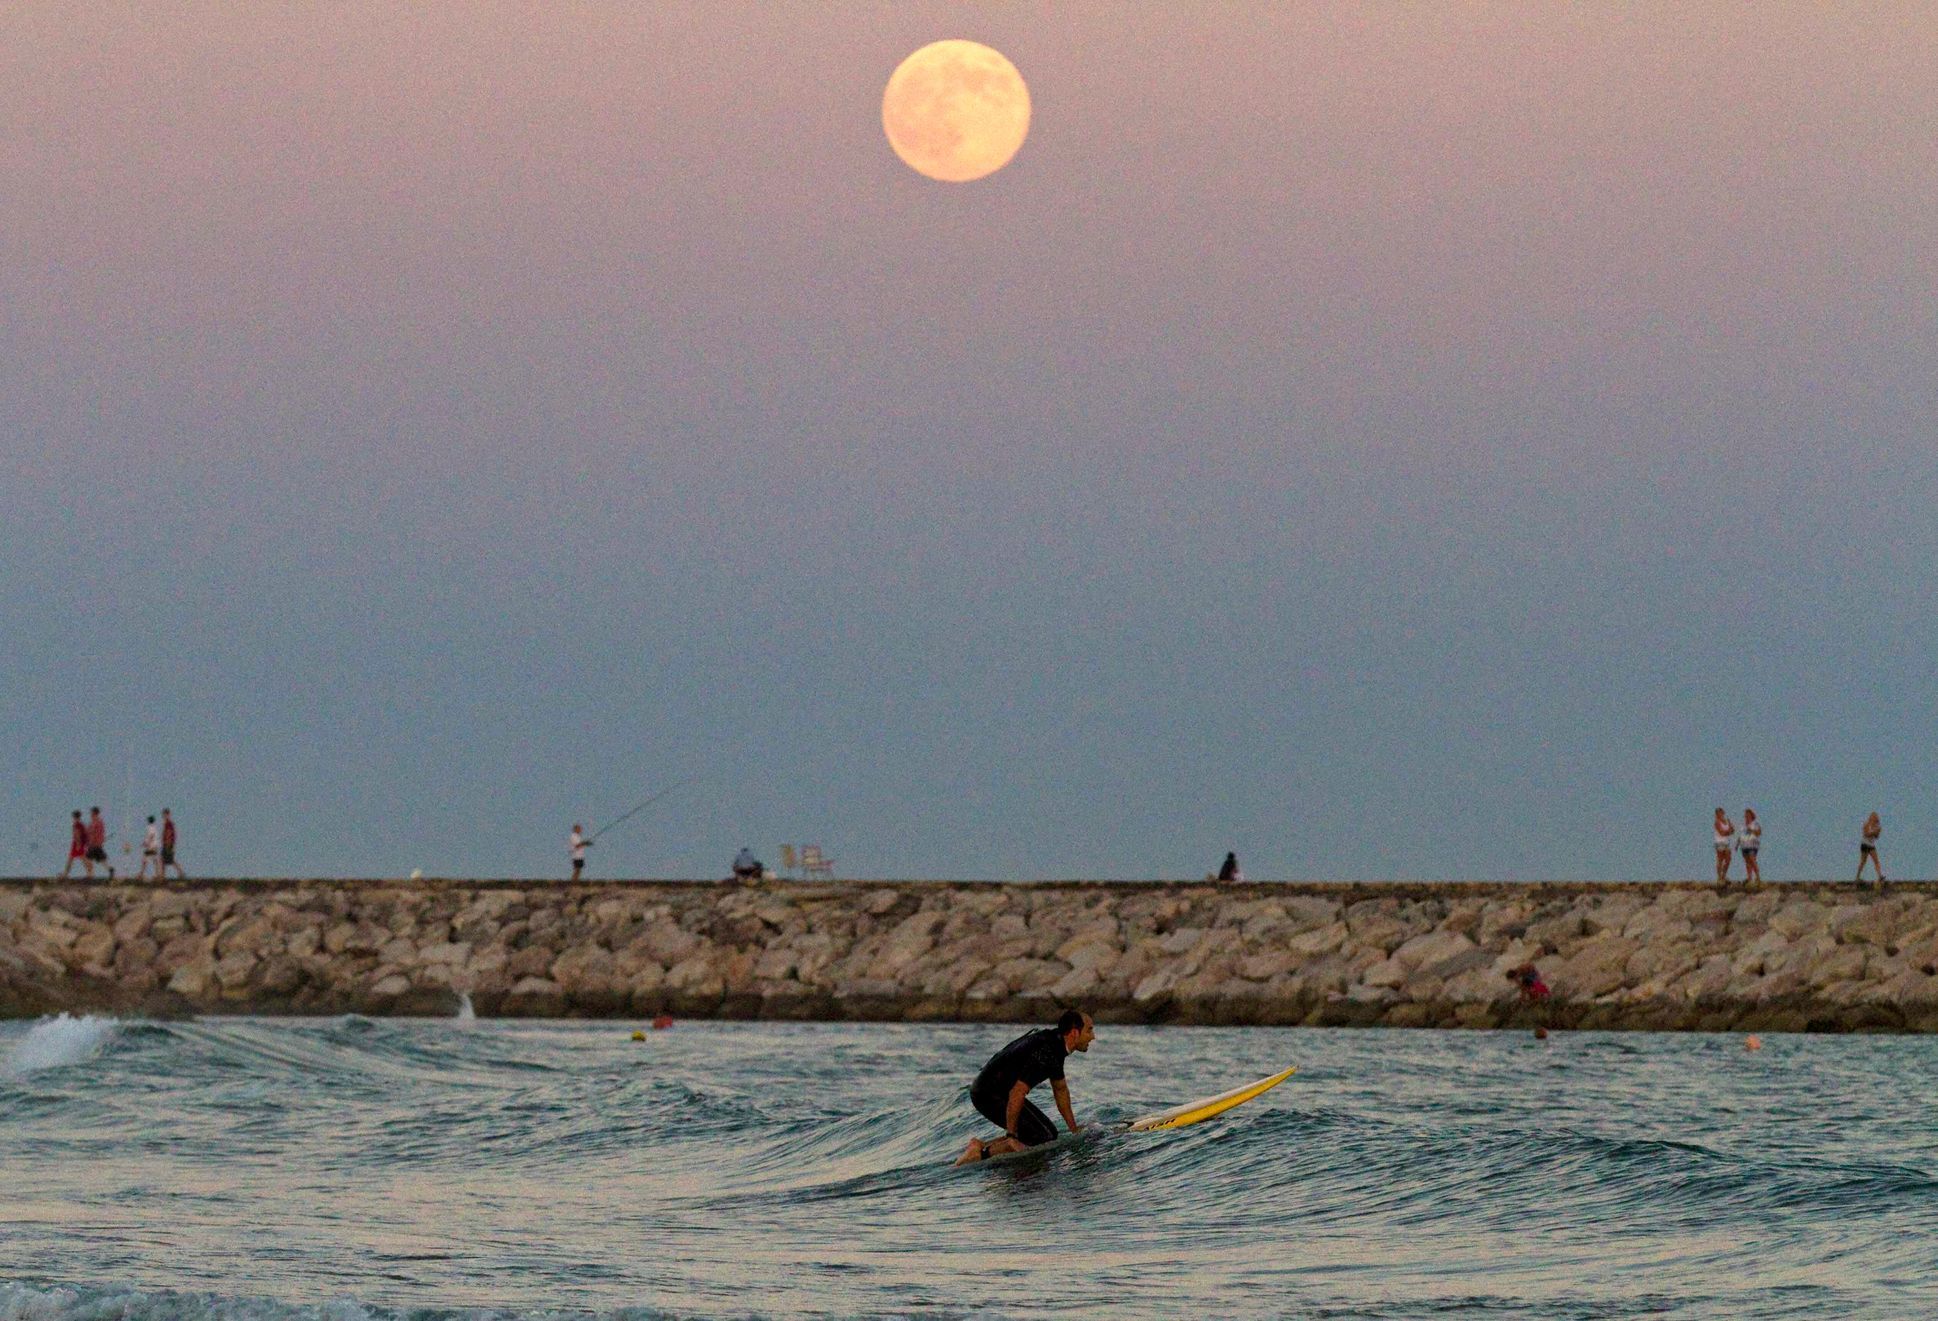 The supermoon rises over the Mediterranean sea at Cabopino beach in southern Spain